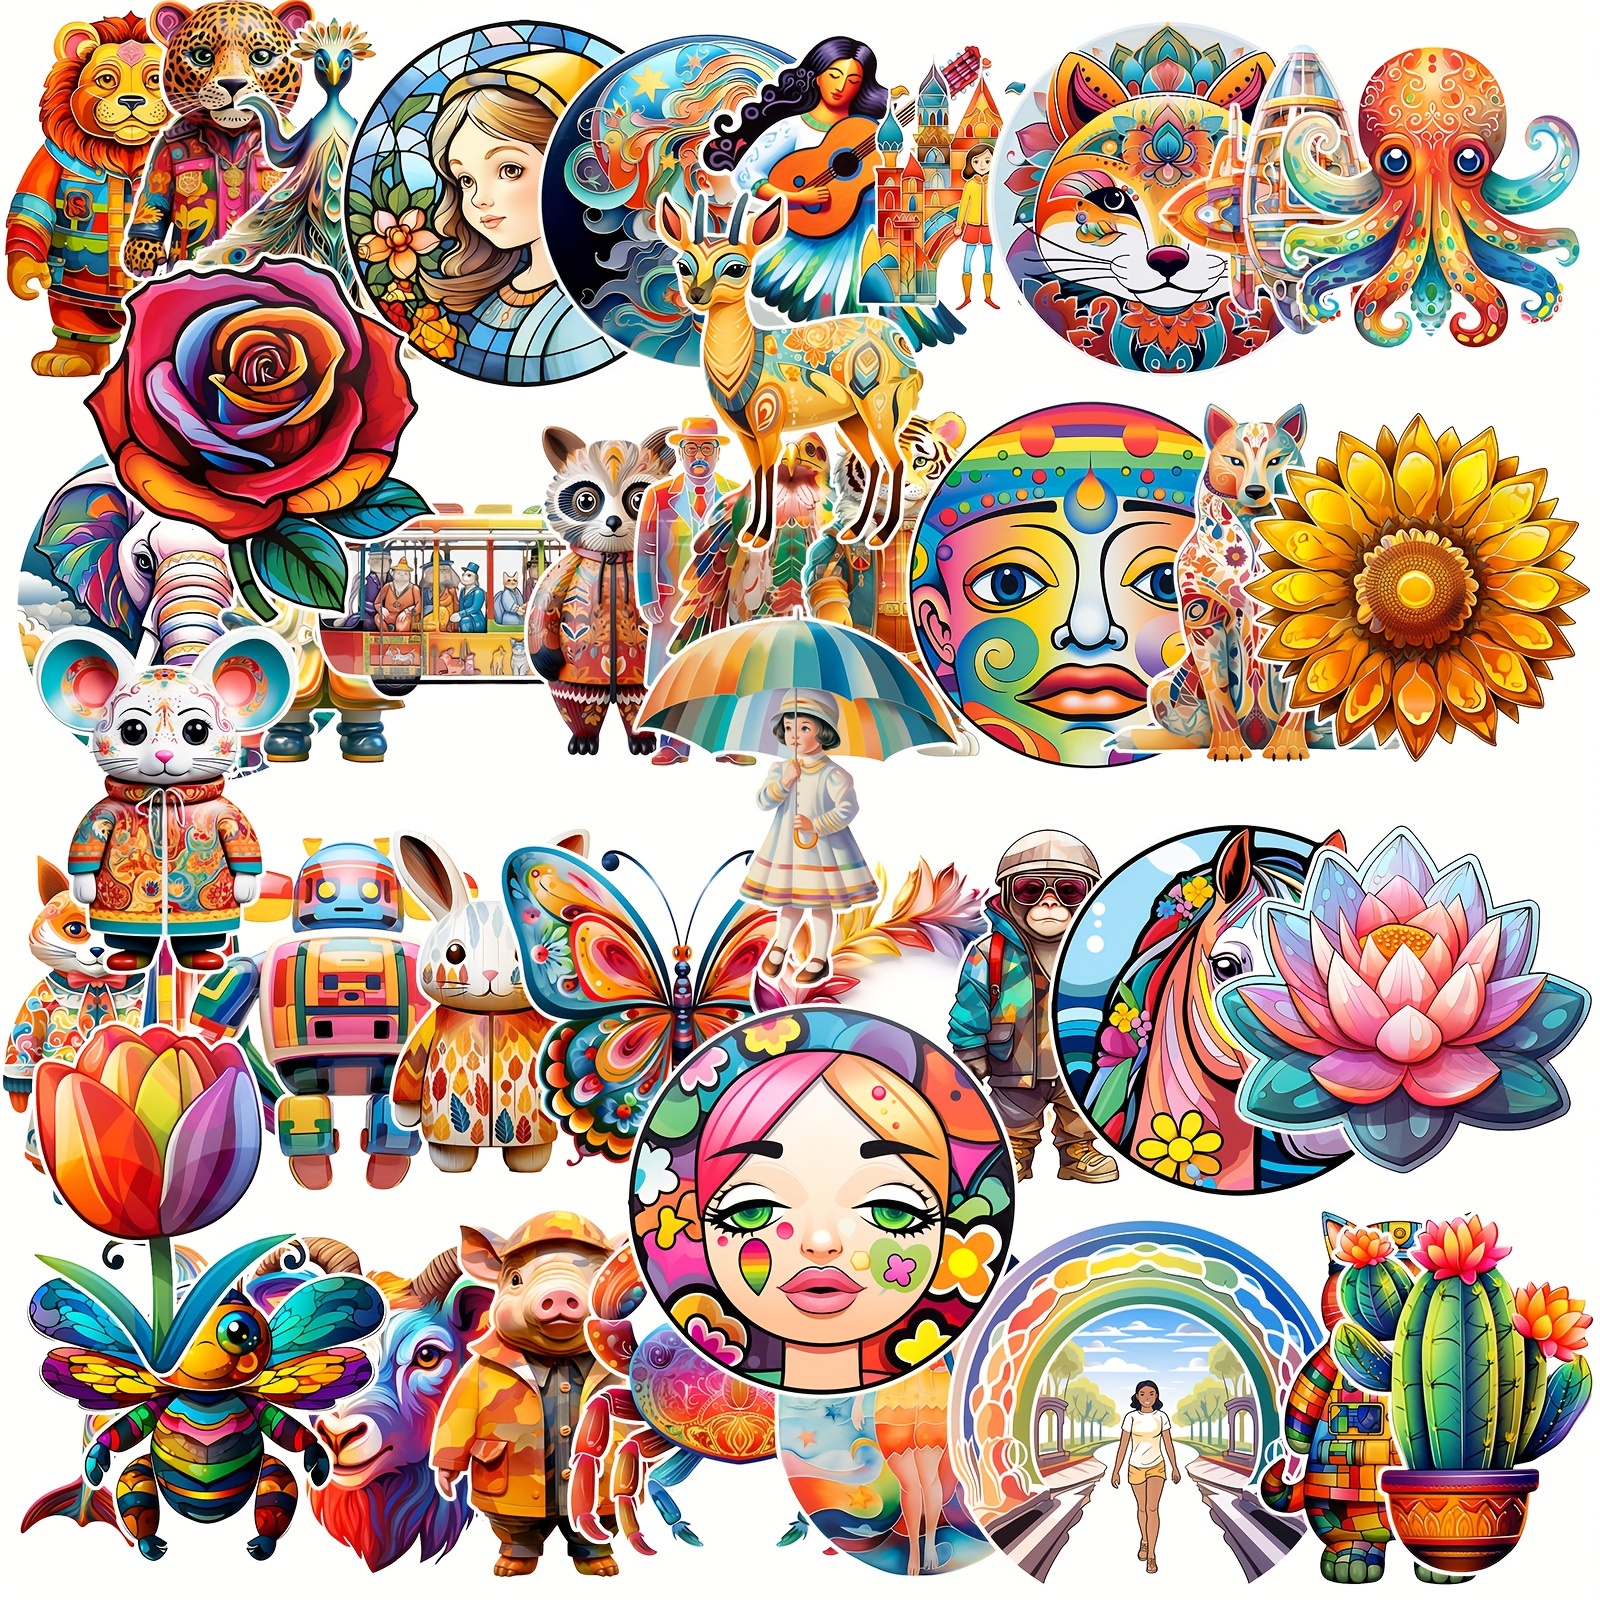 50pcs Hippie Stickers Aesthetic Sticker Packs Hippy Party Decorations Vinyl  Waterproof Stickers For Laptop, Water Bottles, Computer, Phone